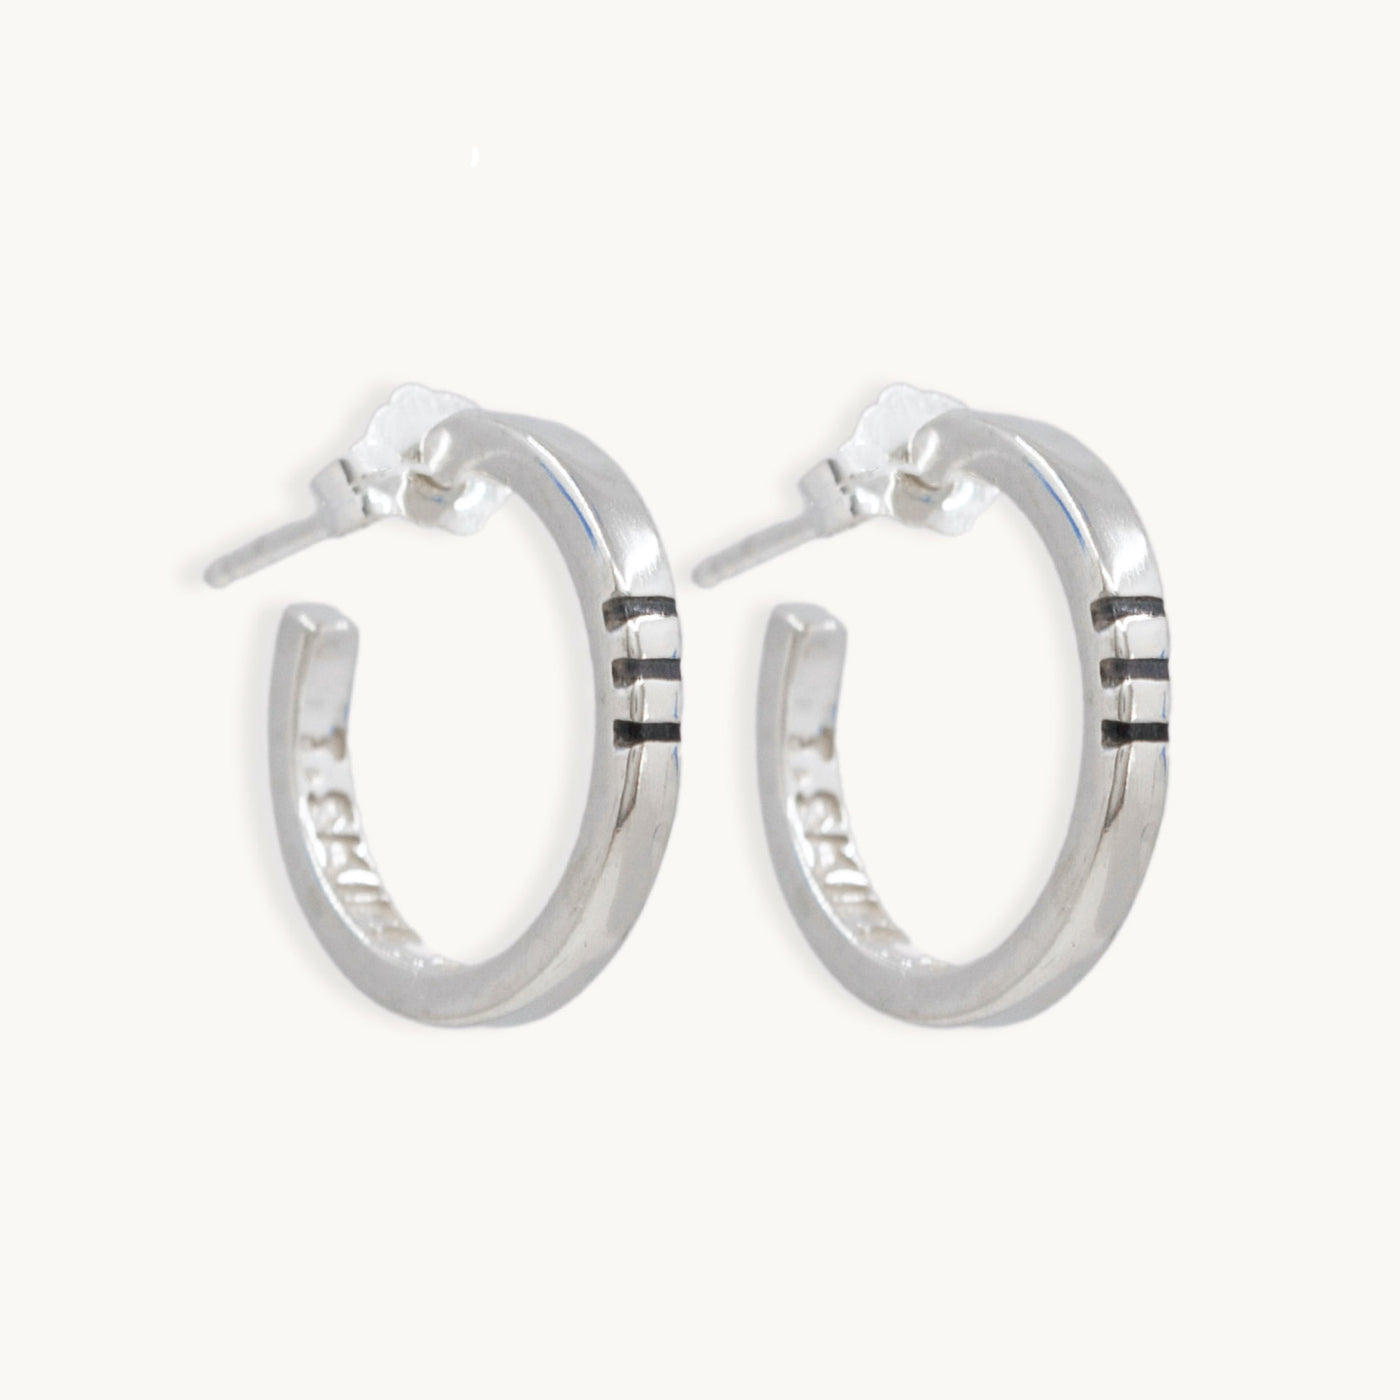 Small Hoop Earrings with Sterling Silver